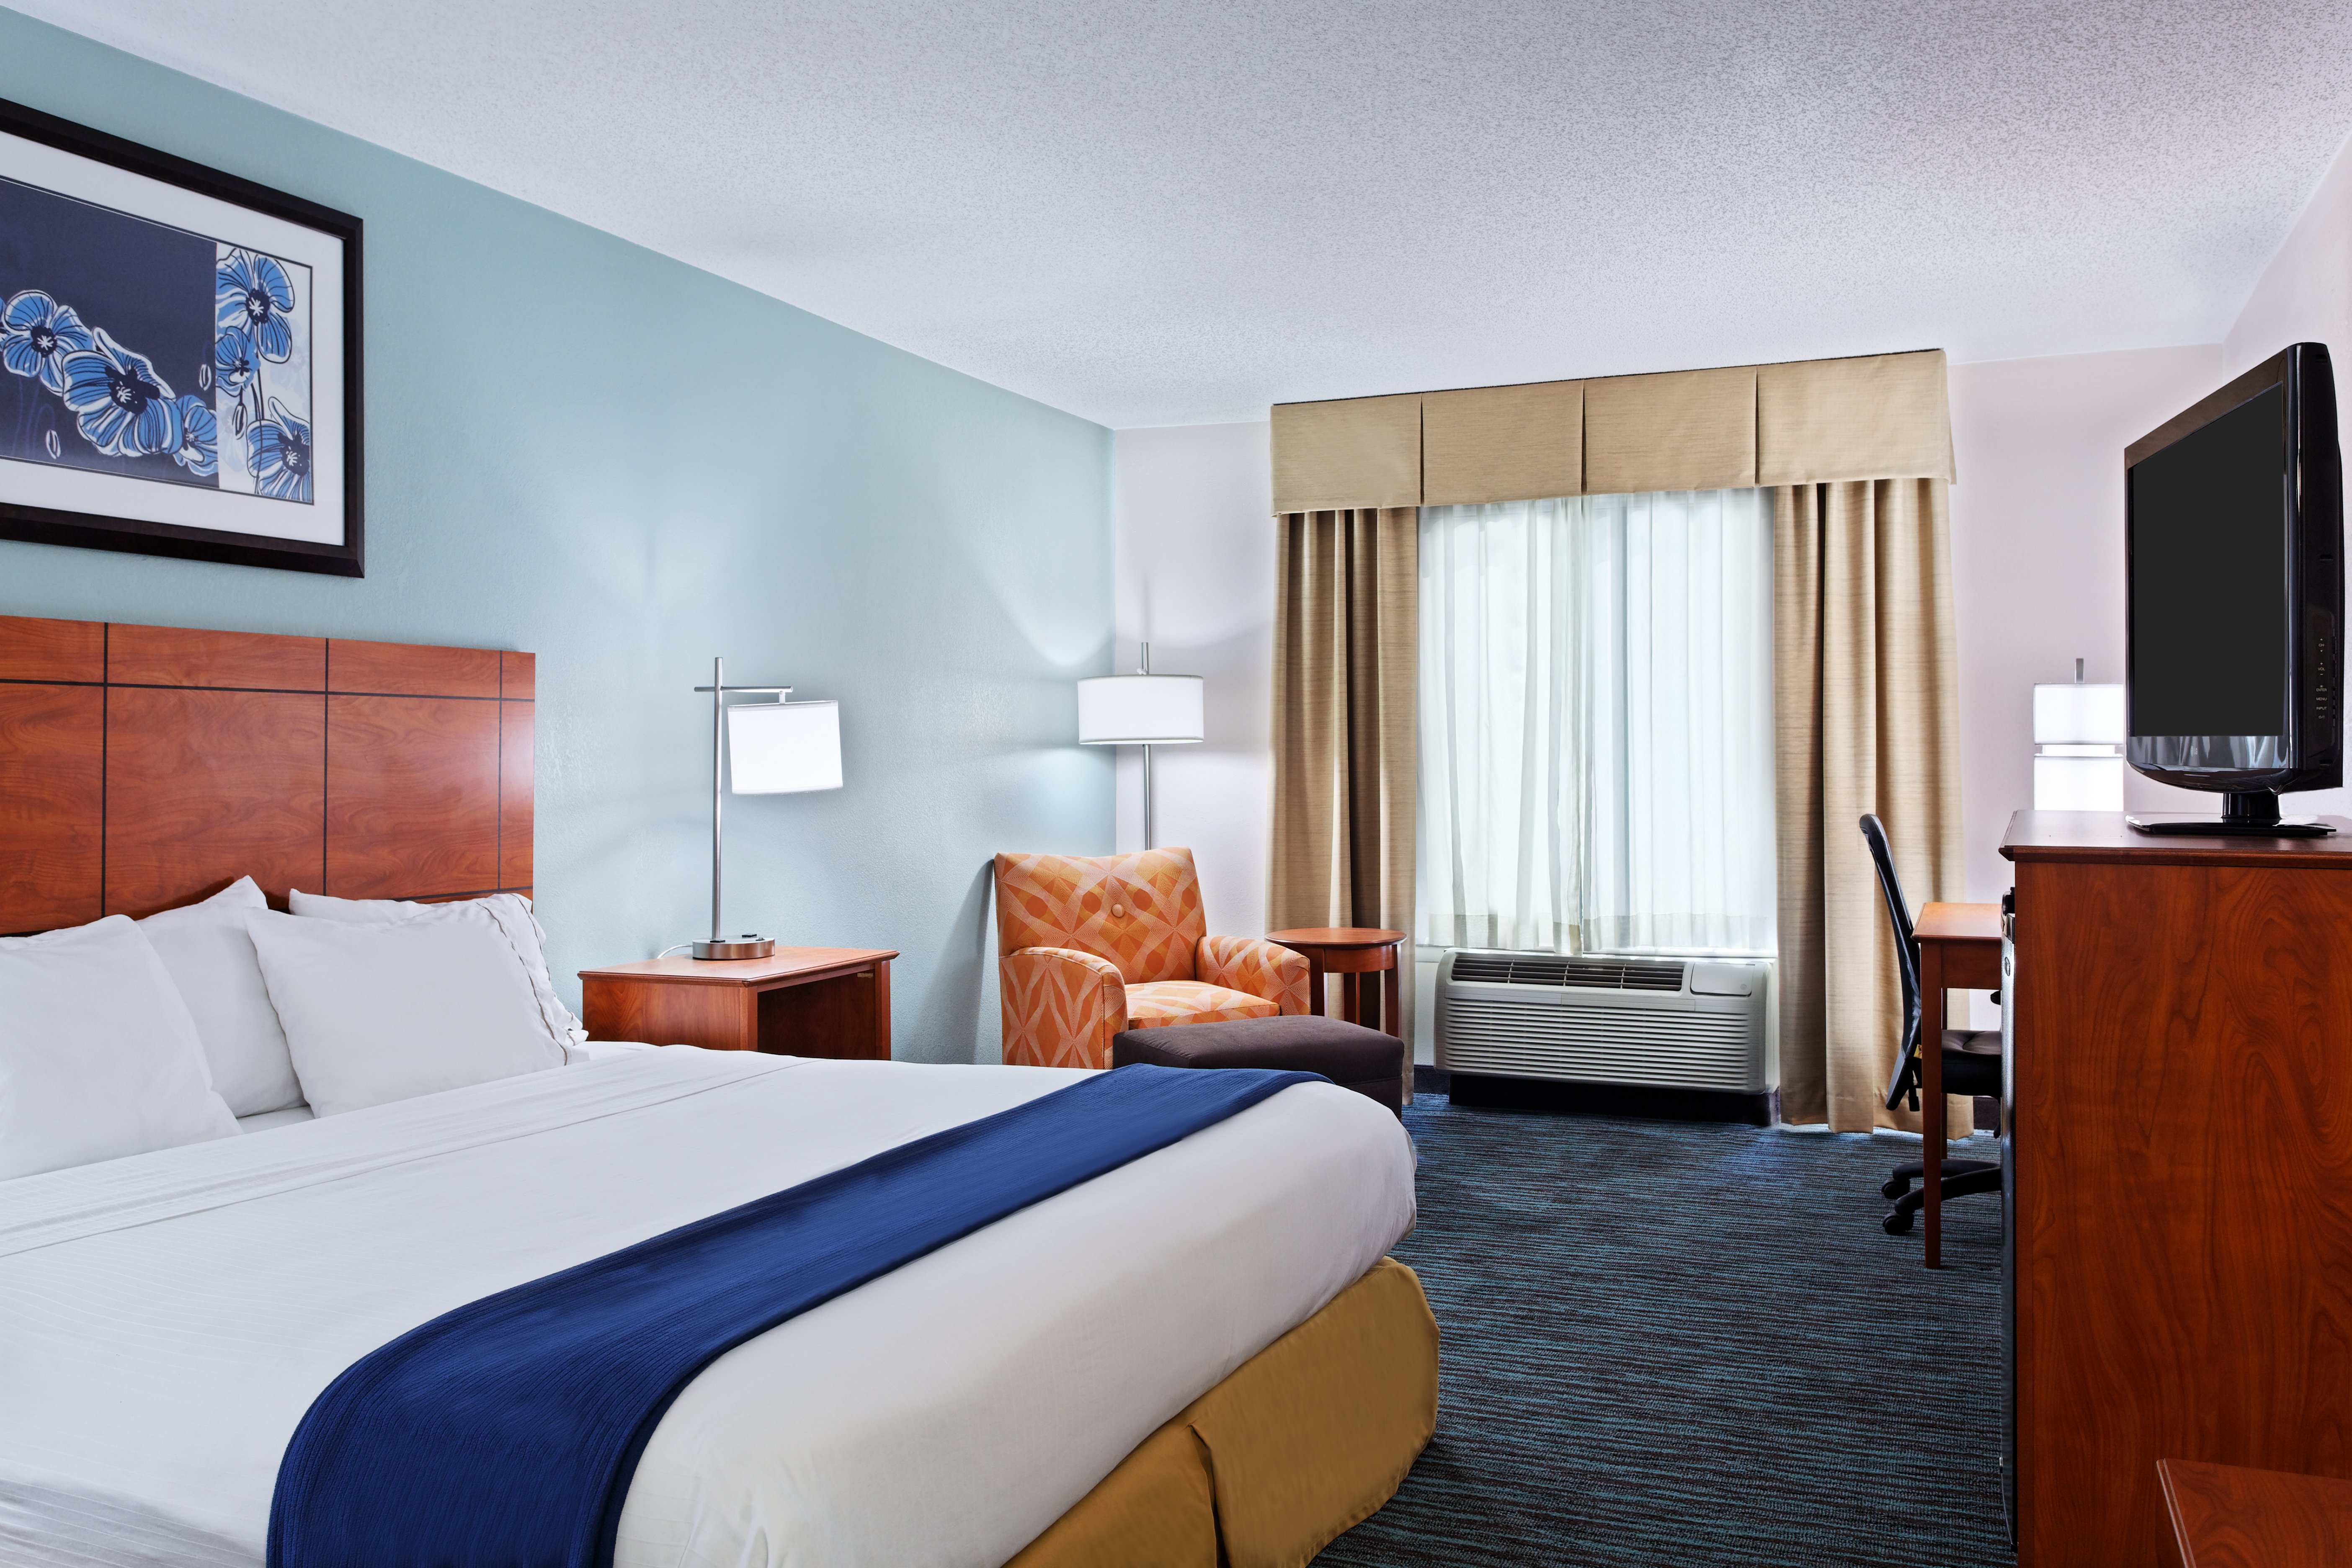 Enjoy a great night's sleep on our cozy King bed!